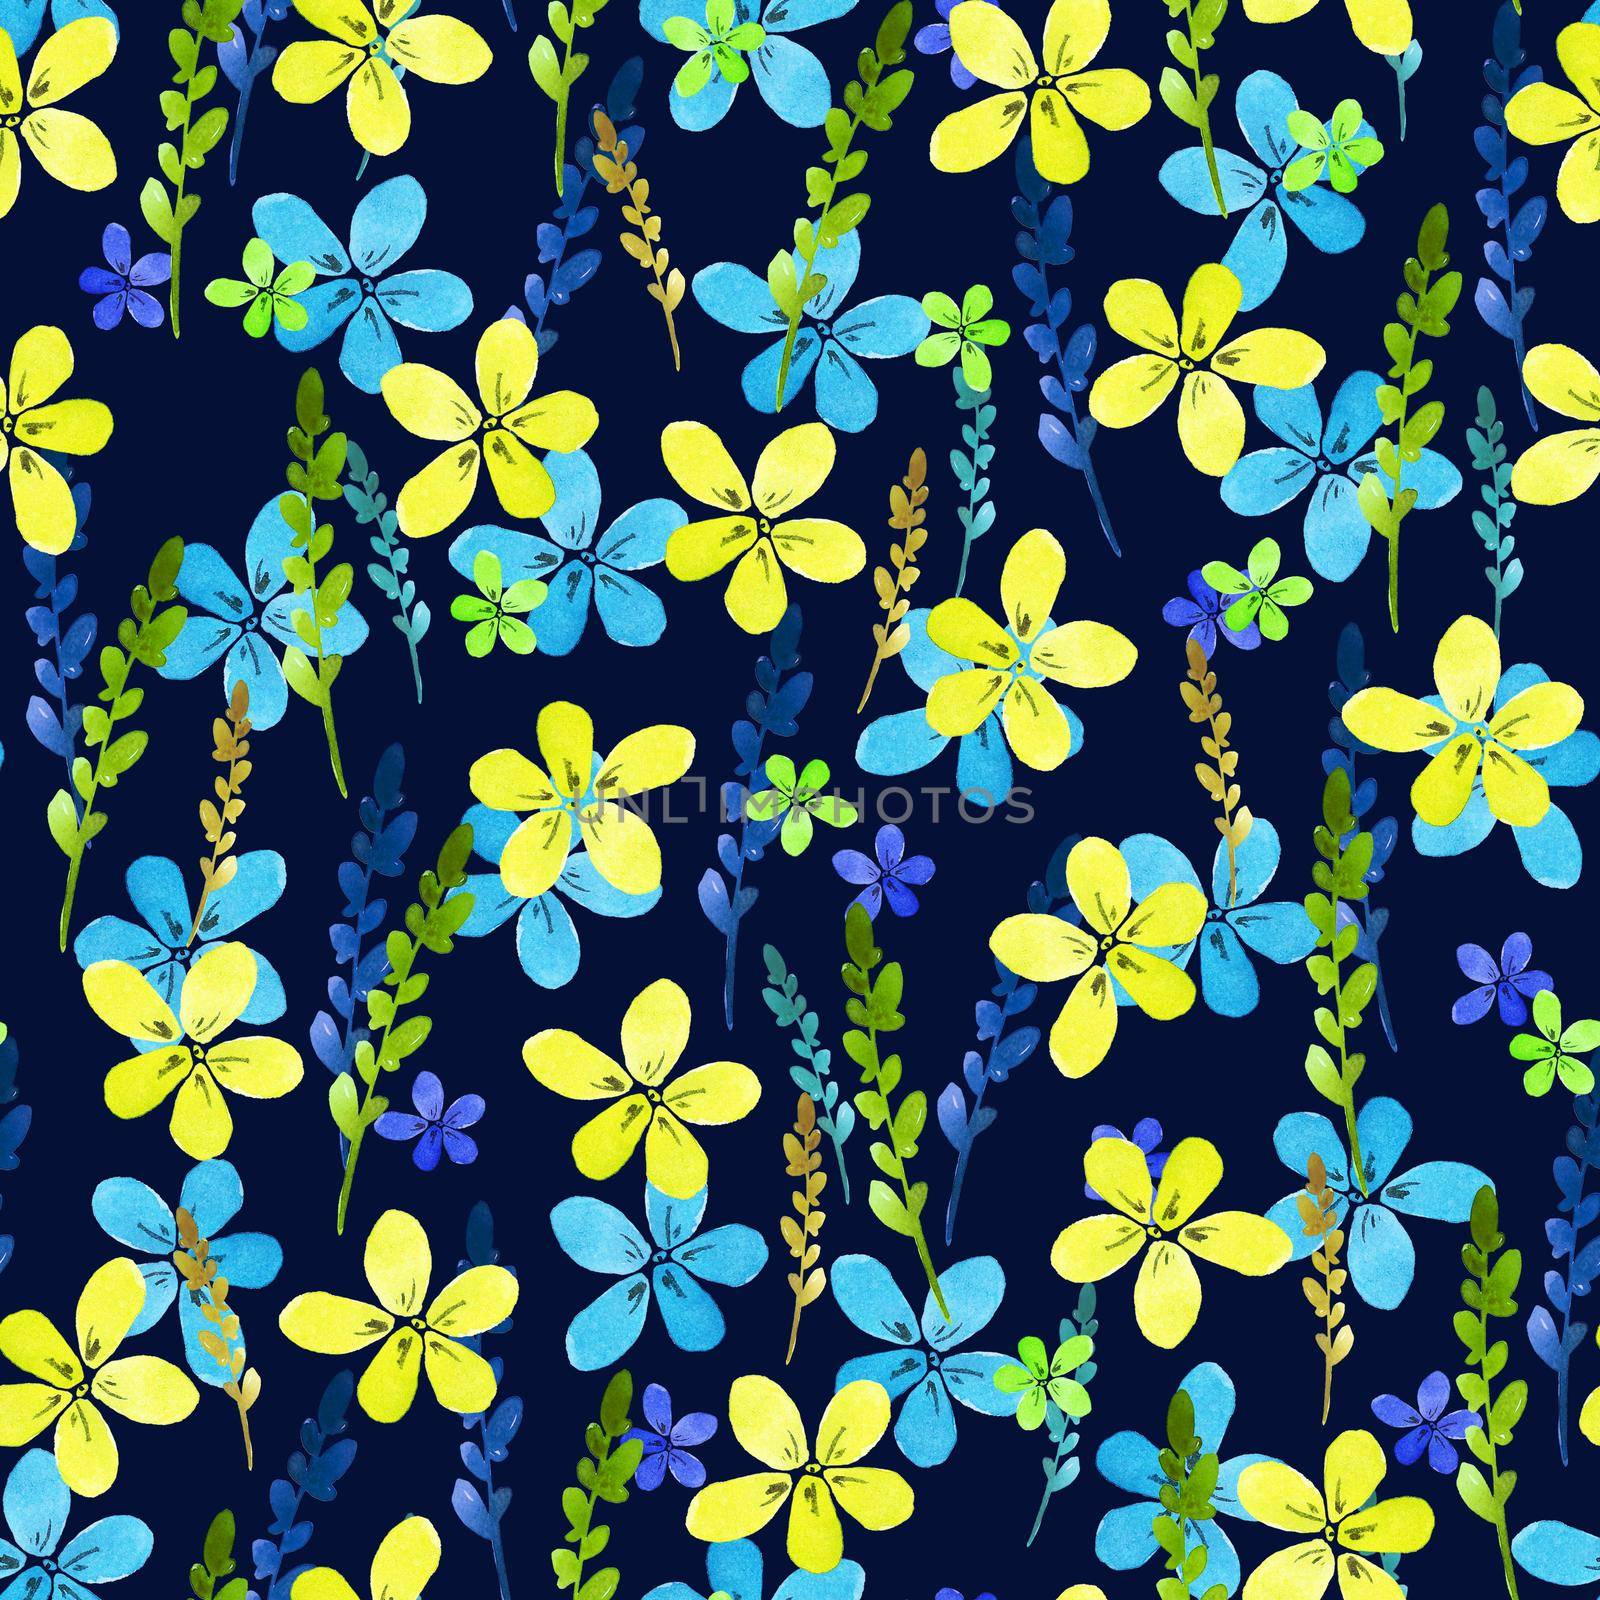 Seamless floral pattern with watercolor blue yellow flowers and leaves in vintage style on blue background. Hand made. Ornate for textile, fabric, wallpaper, print. Nature illustration. Painting elements.